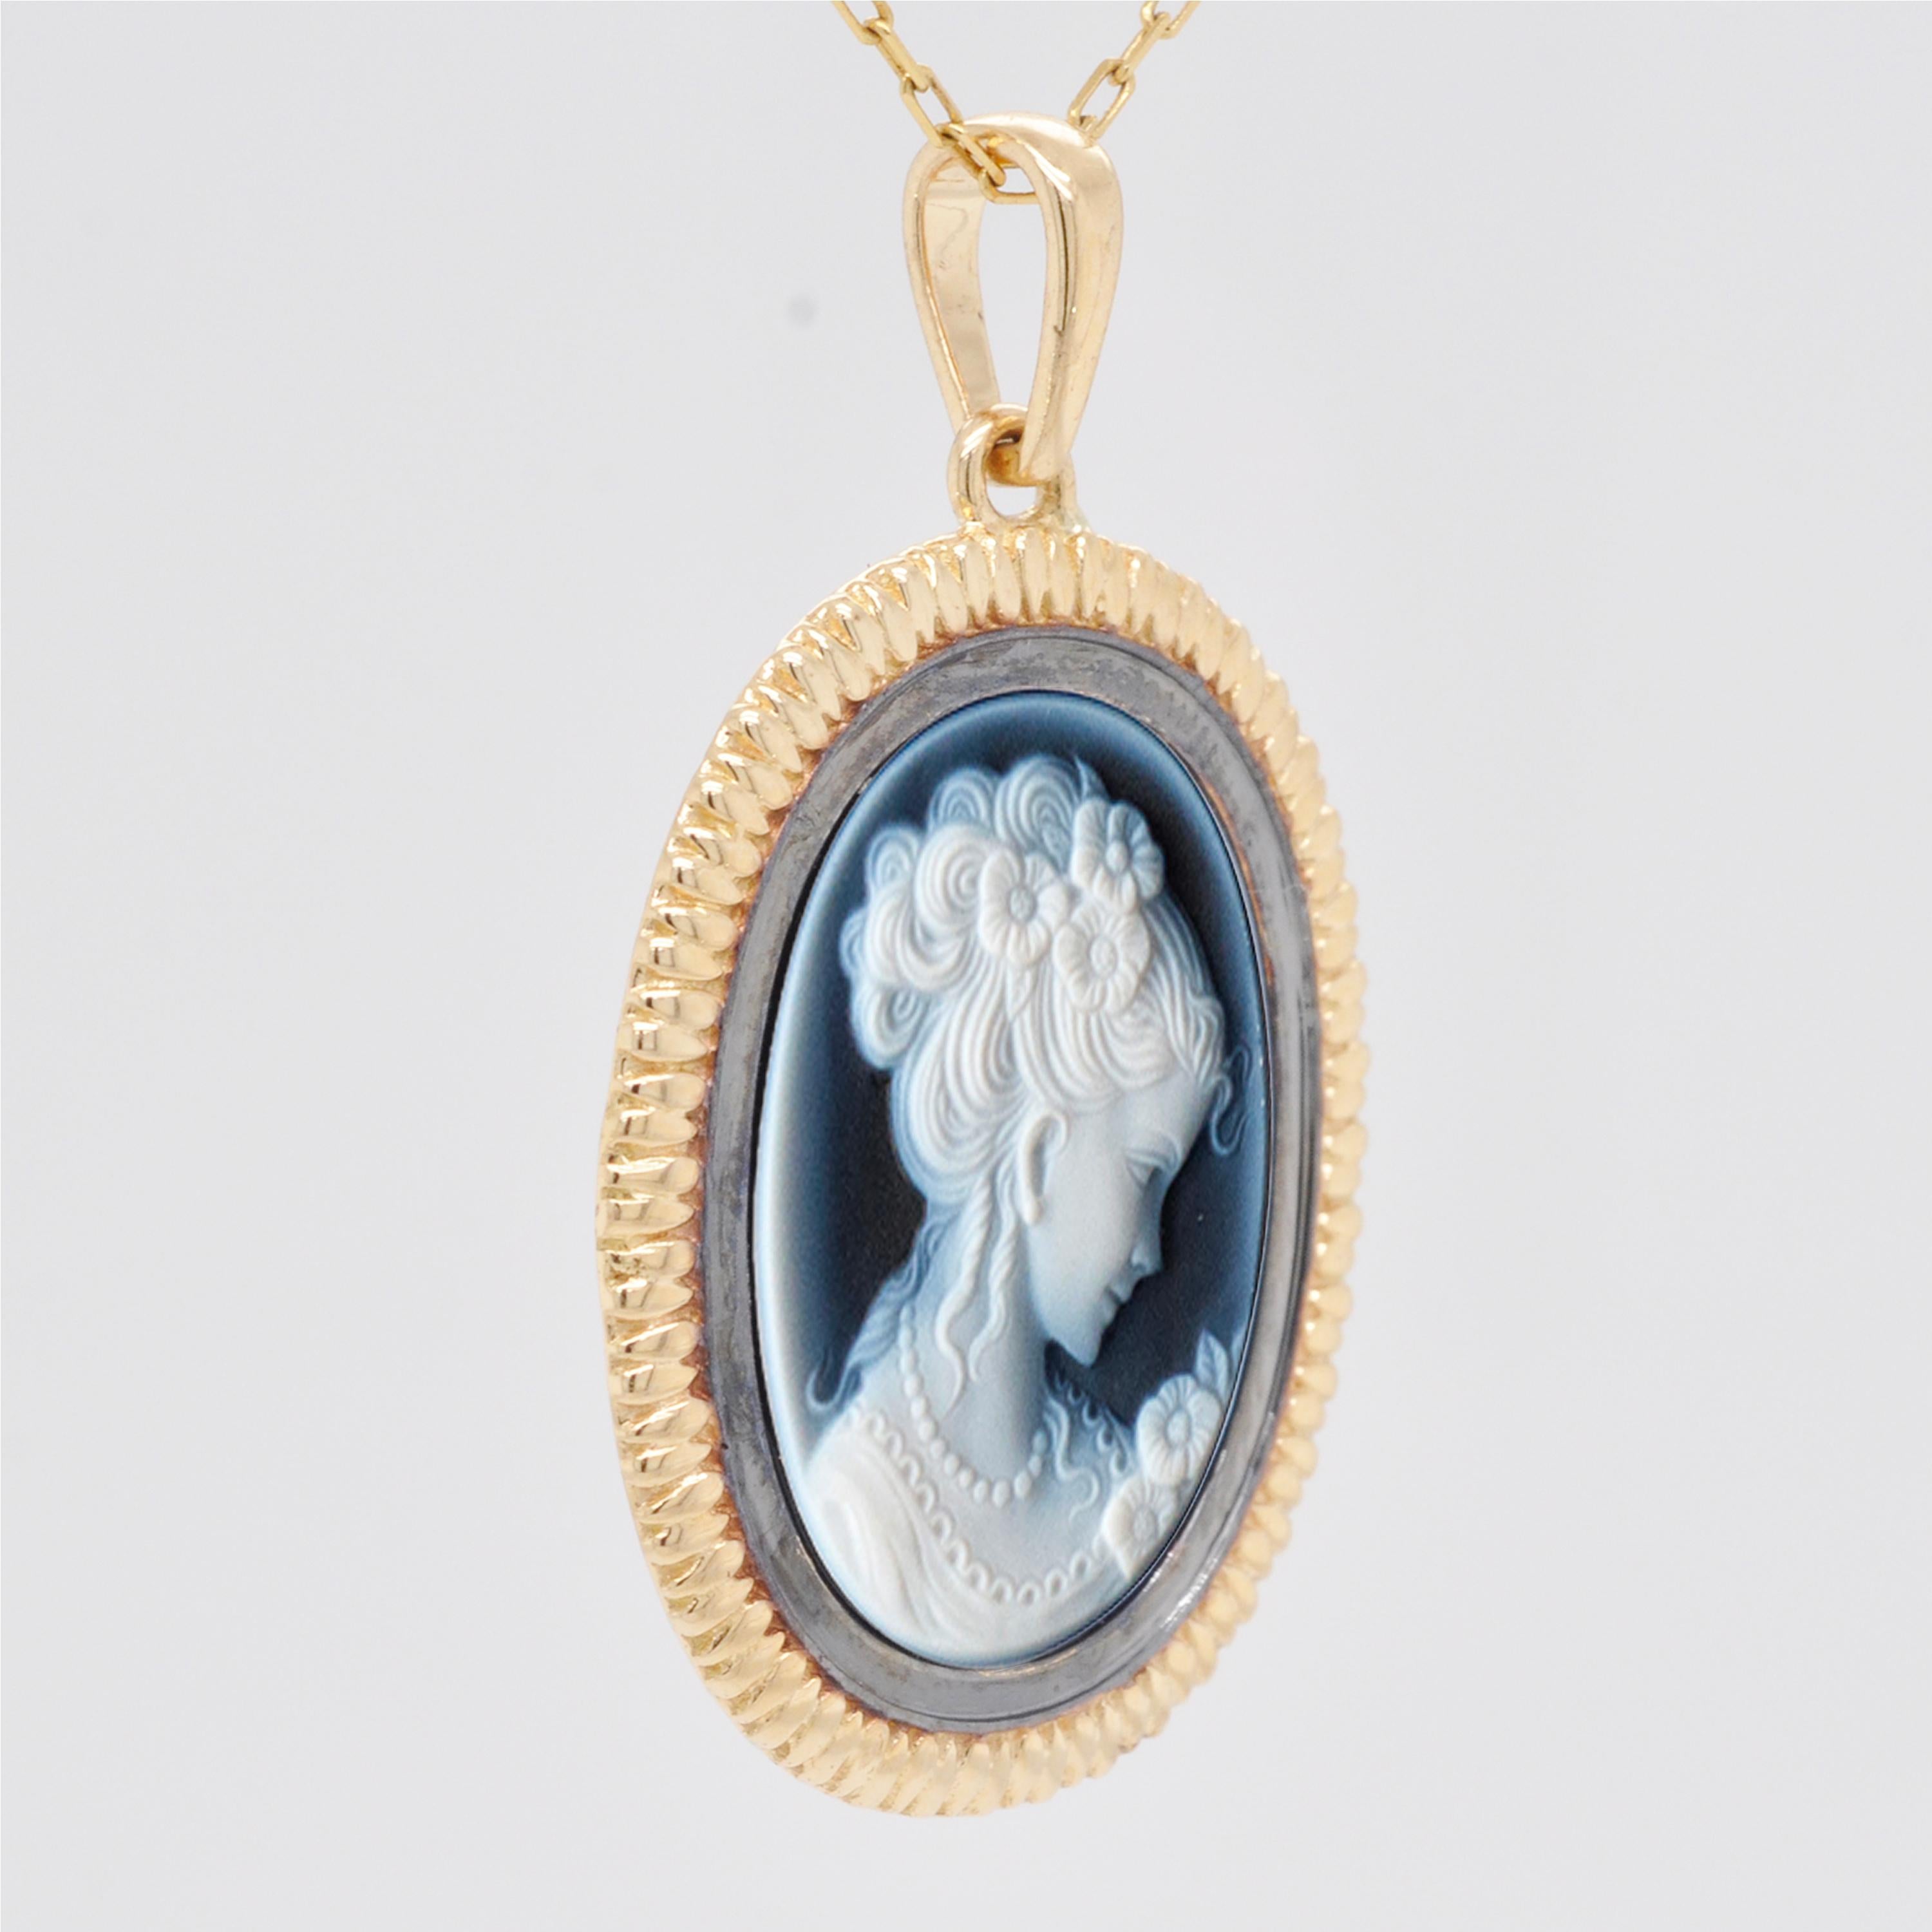 14K Yellow Gold Princess Lady Victorian Agate Cameo Carving Pendant Necklace For Sale 2